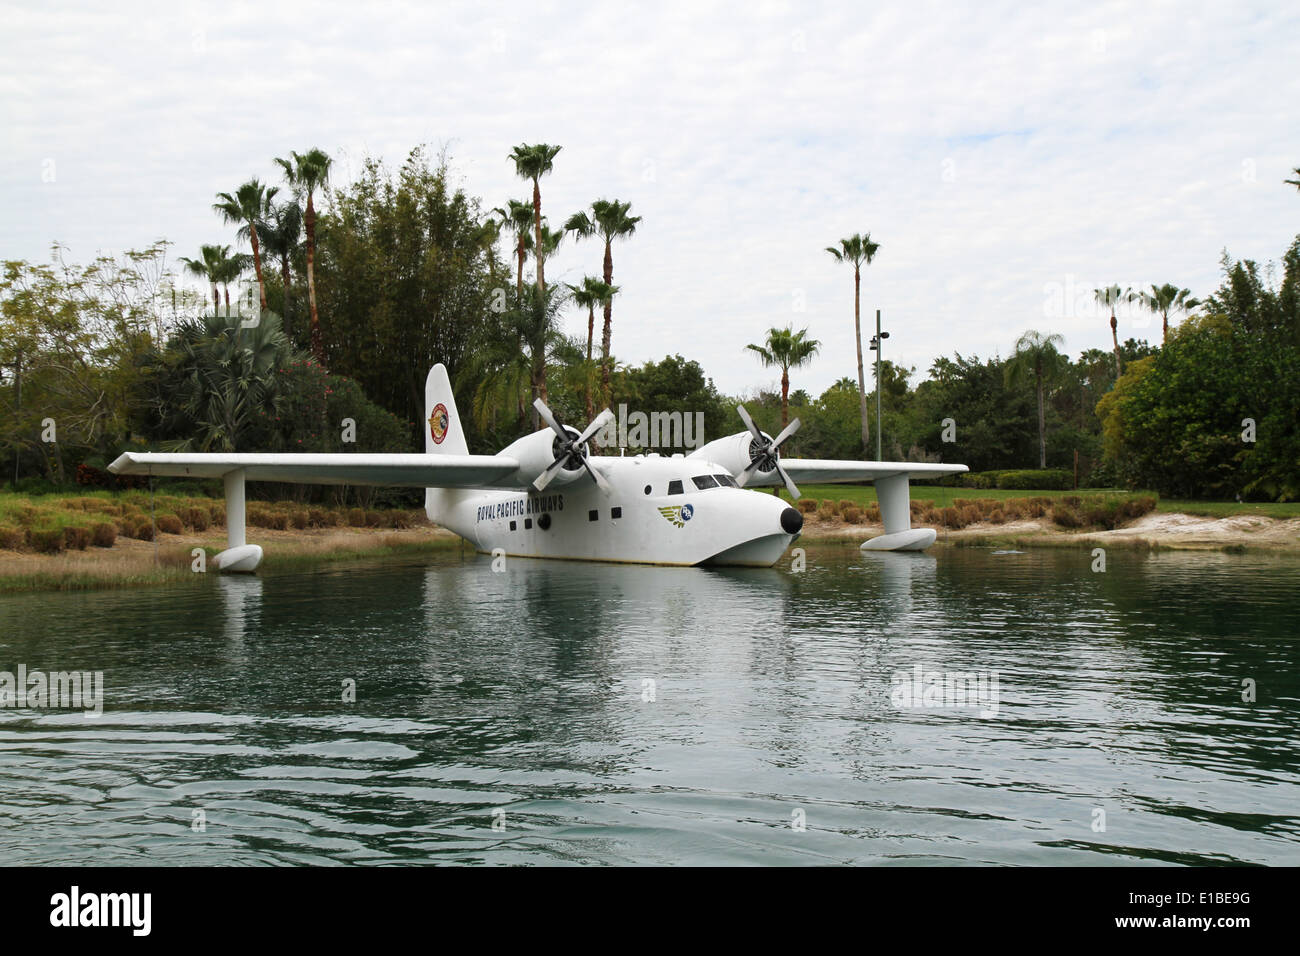 A Grumman Flying Boat with Royal Pacific Airways markings at Universal Studios Orlando Stock Photo